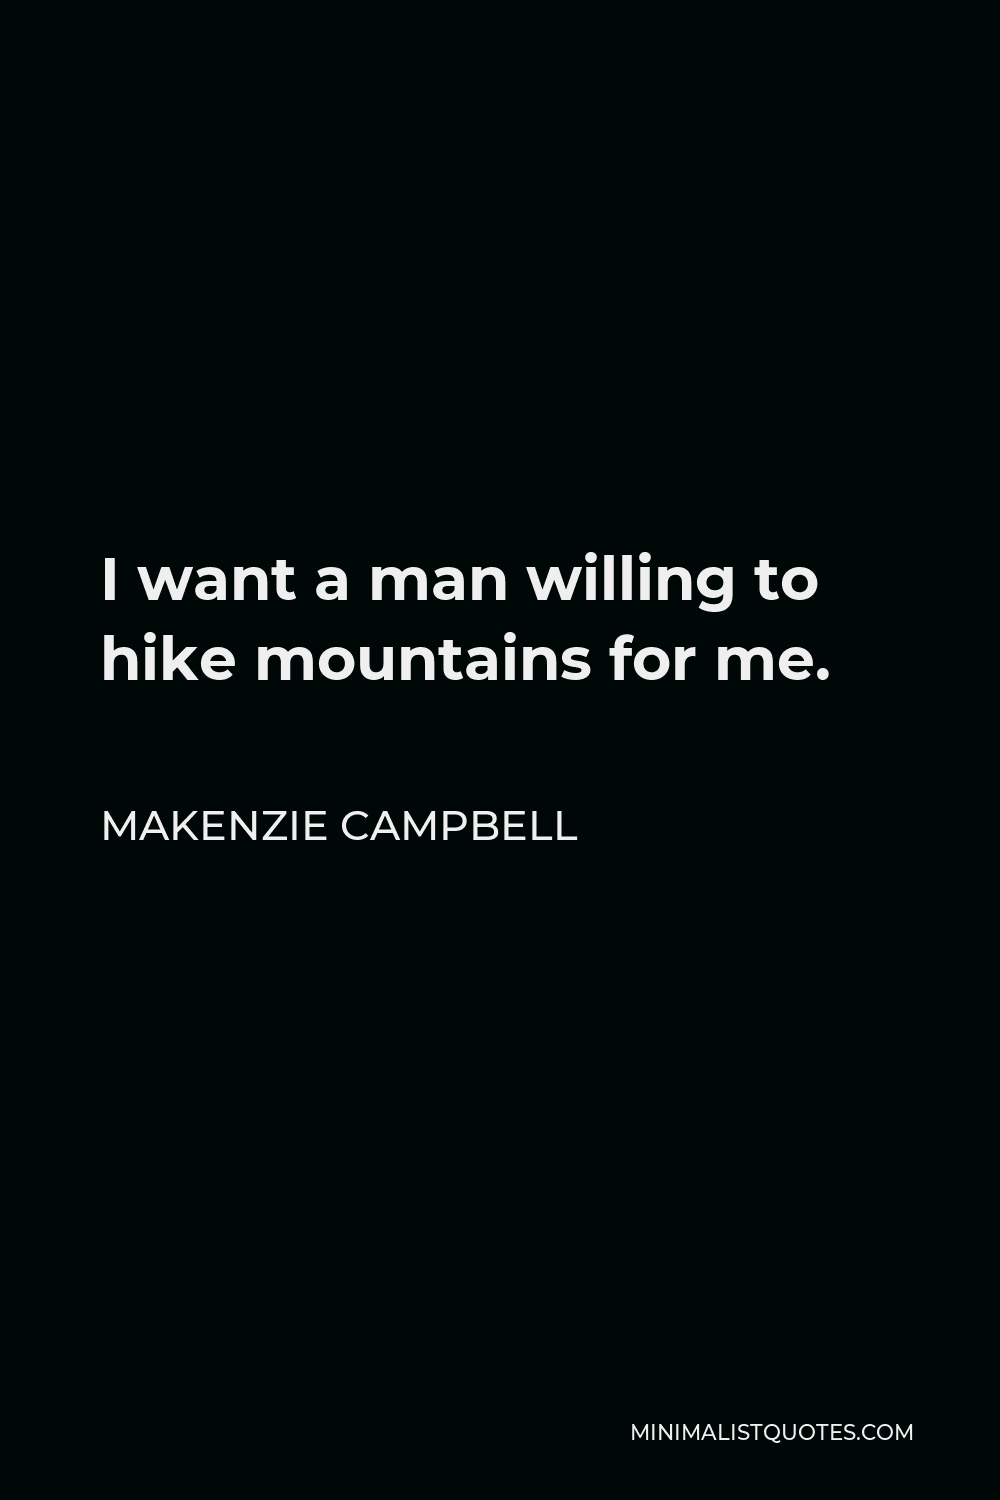 Makenzie Campbell Quote - I want a man willing to hike mountains for me.